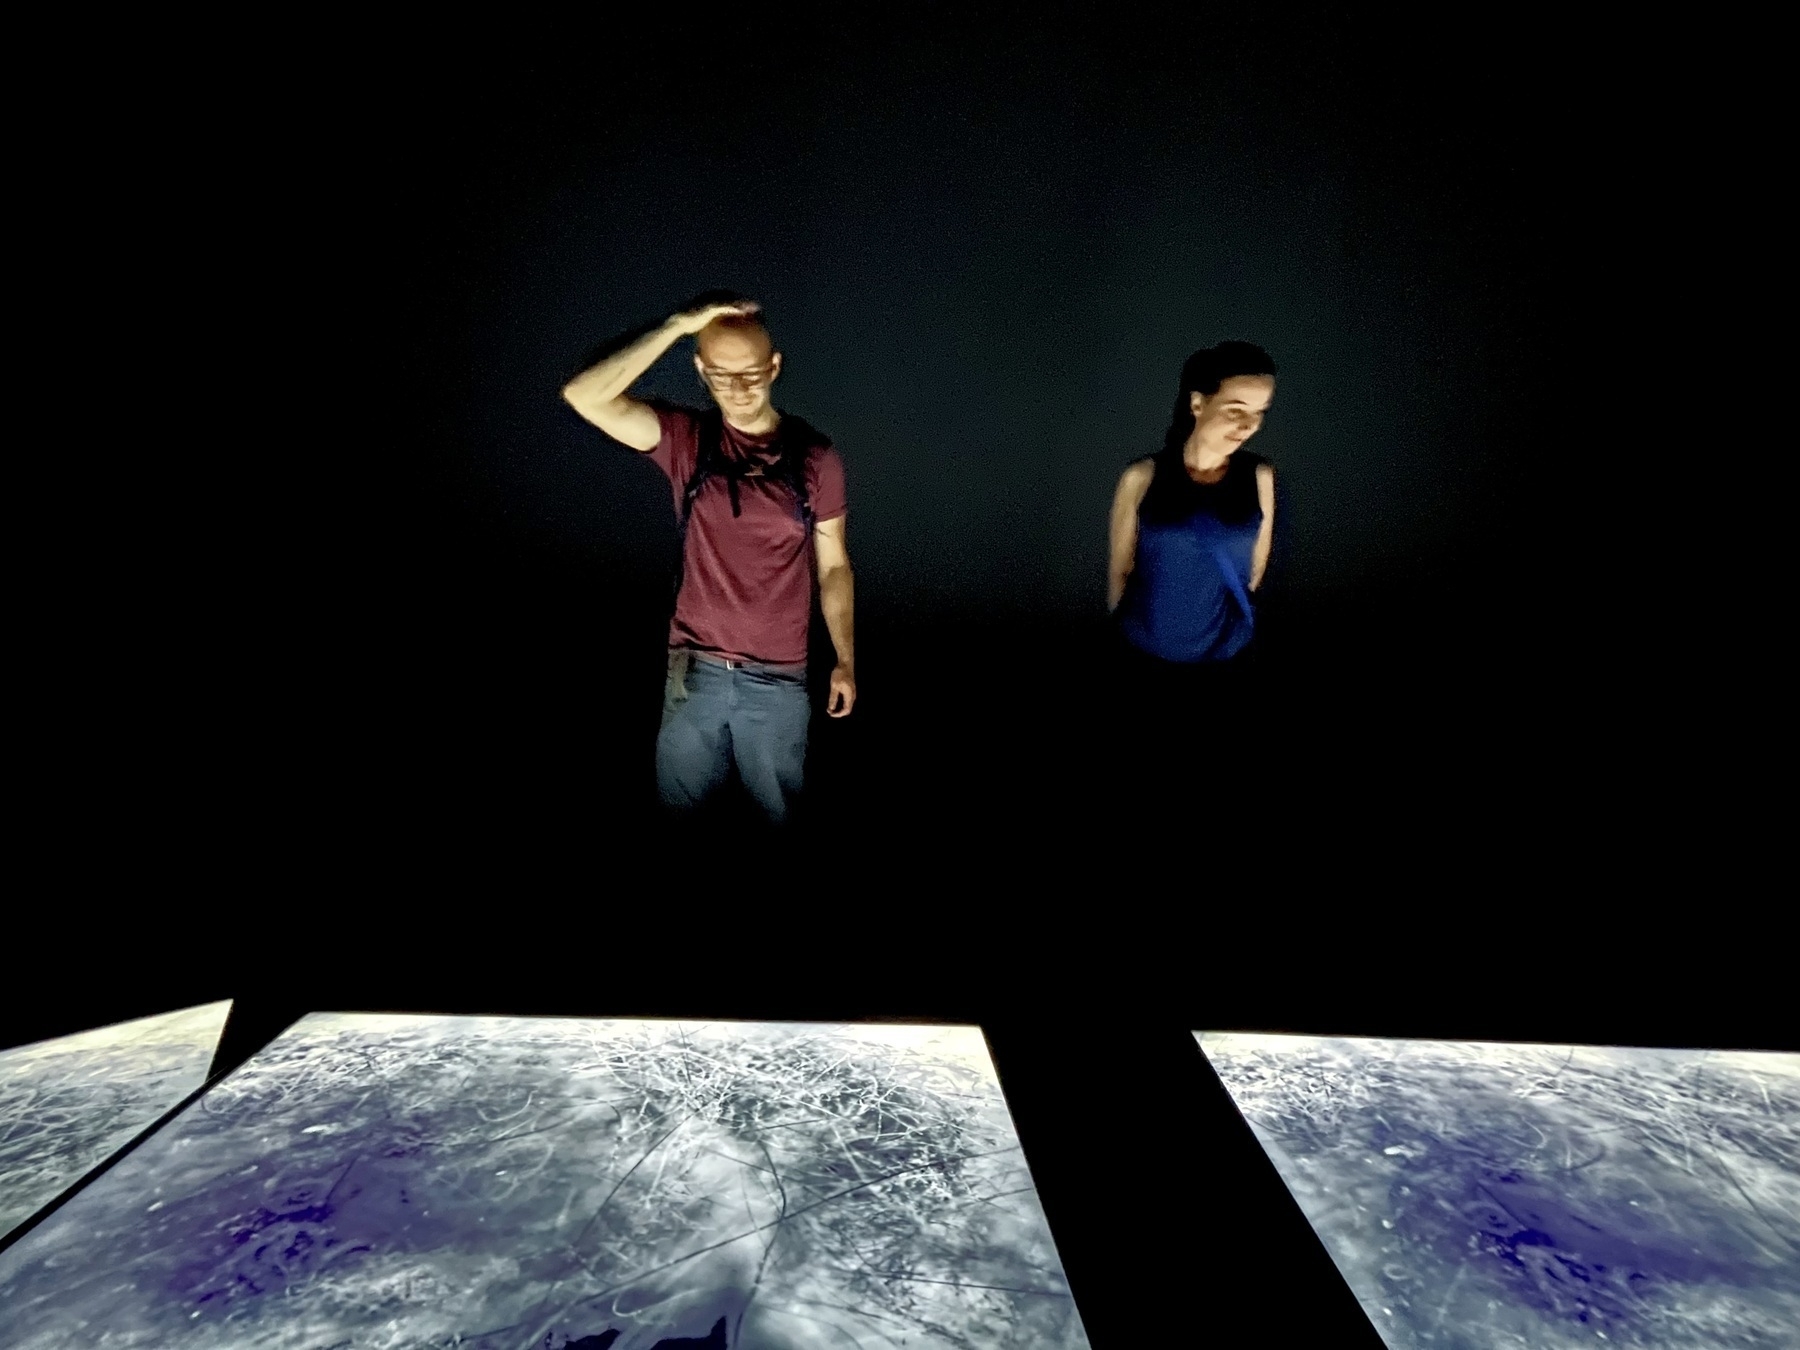 Adrian and Paulina view Herman Kolgen’s piece “Dust Surface” with 4 screens laid flat showing black and white images over a 10 minute loop.